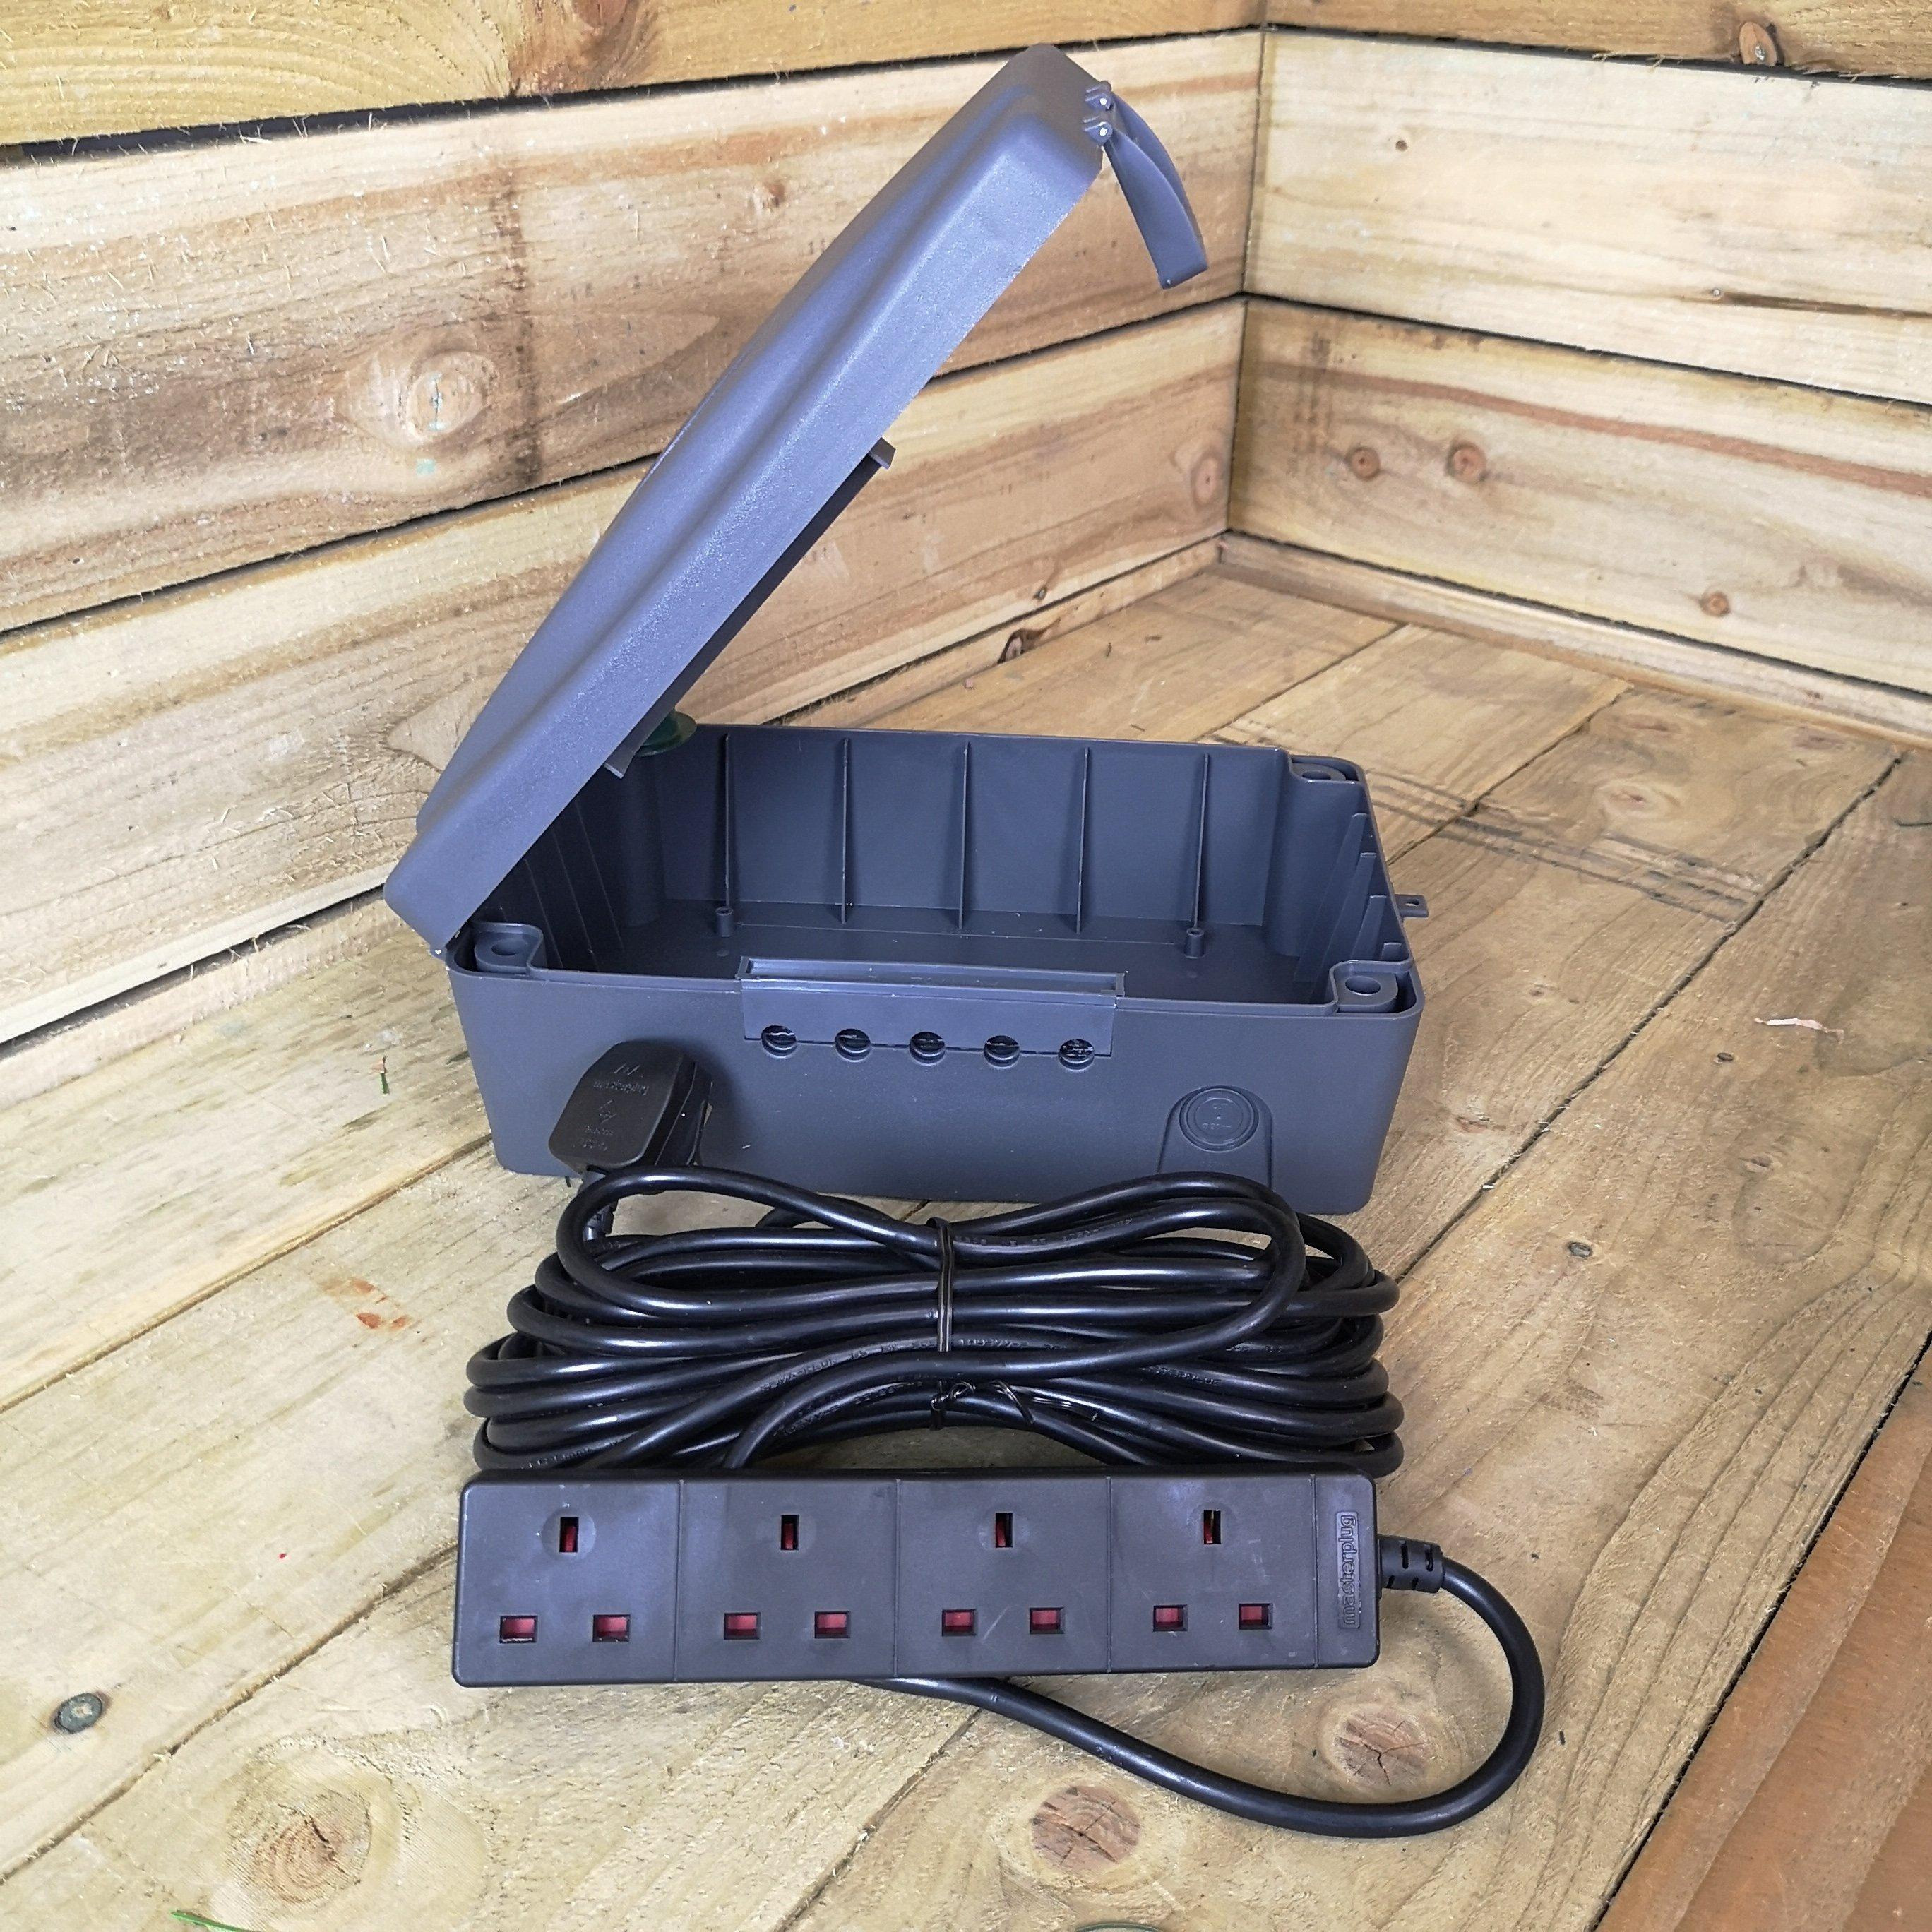 Masterplug Weatherproof Electric Box for Outdoors with Four Socket 10 Metre Extension Lead, 35 x 22 x 123cm Grey - image 1